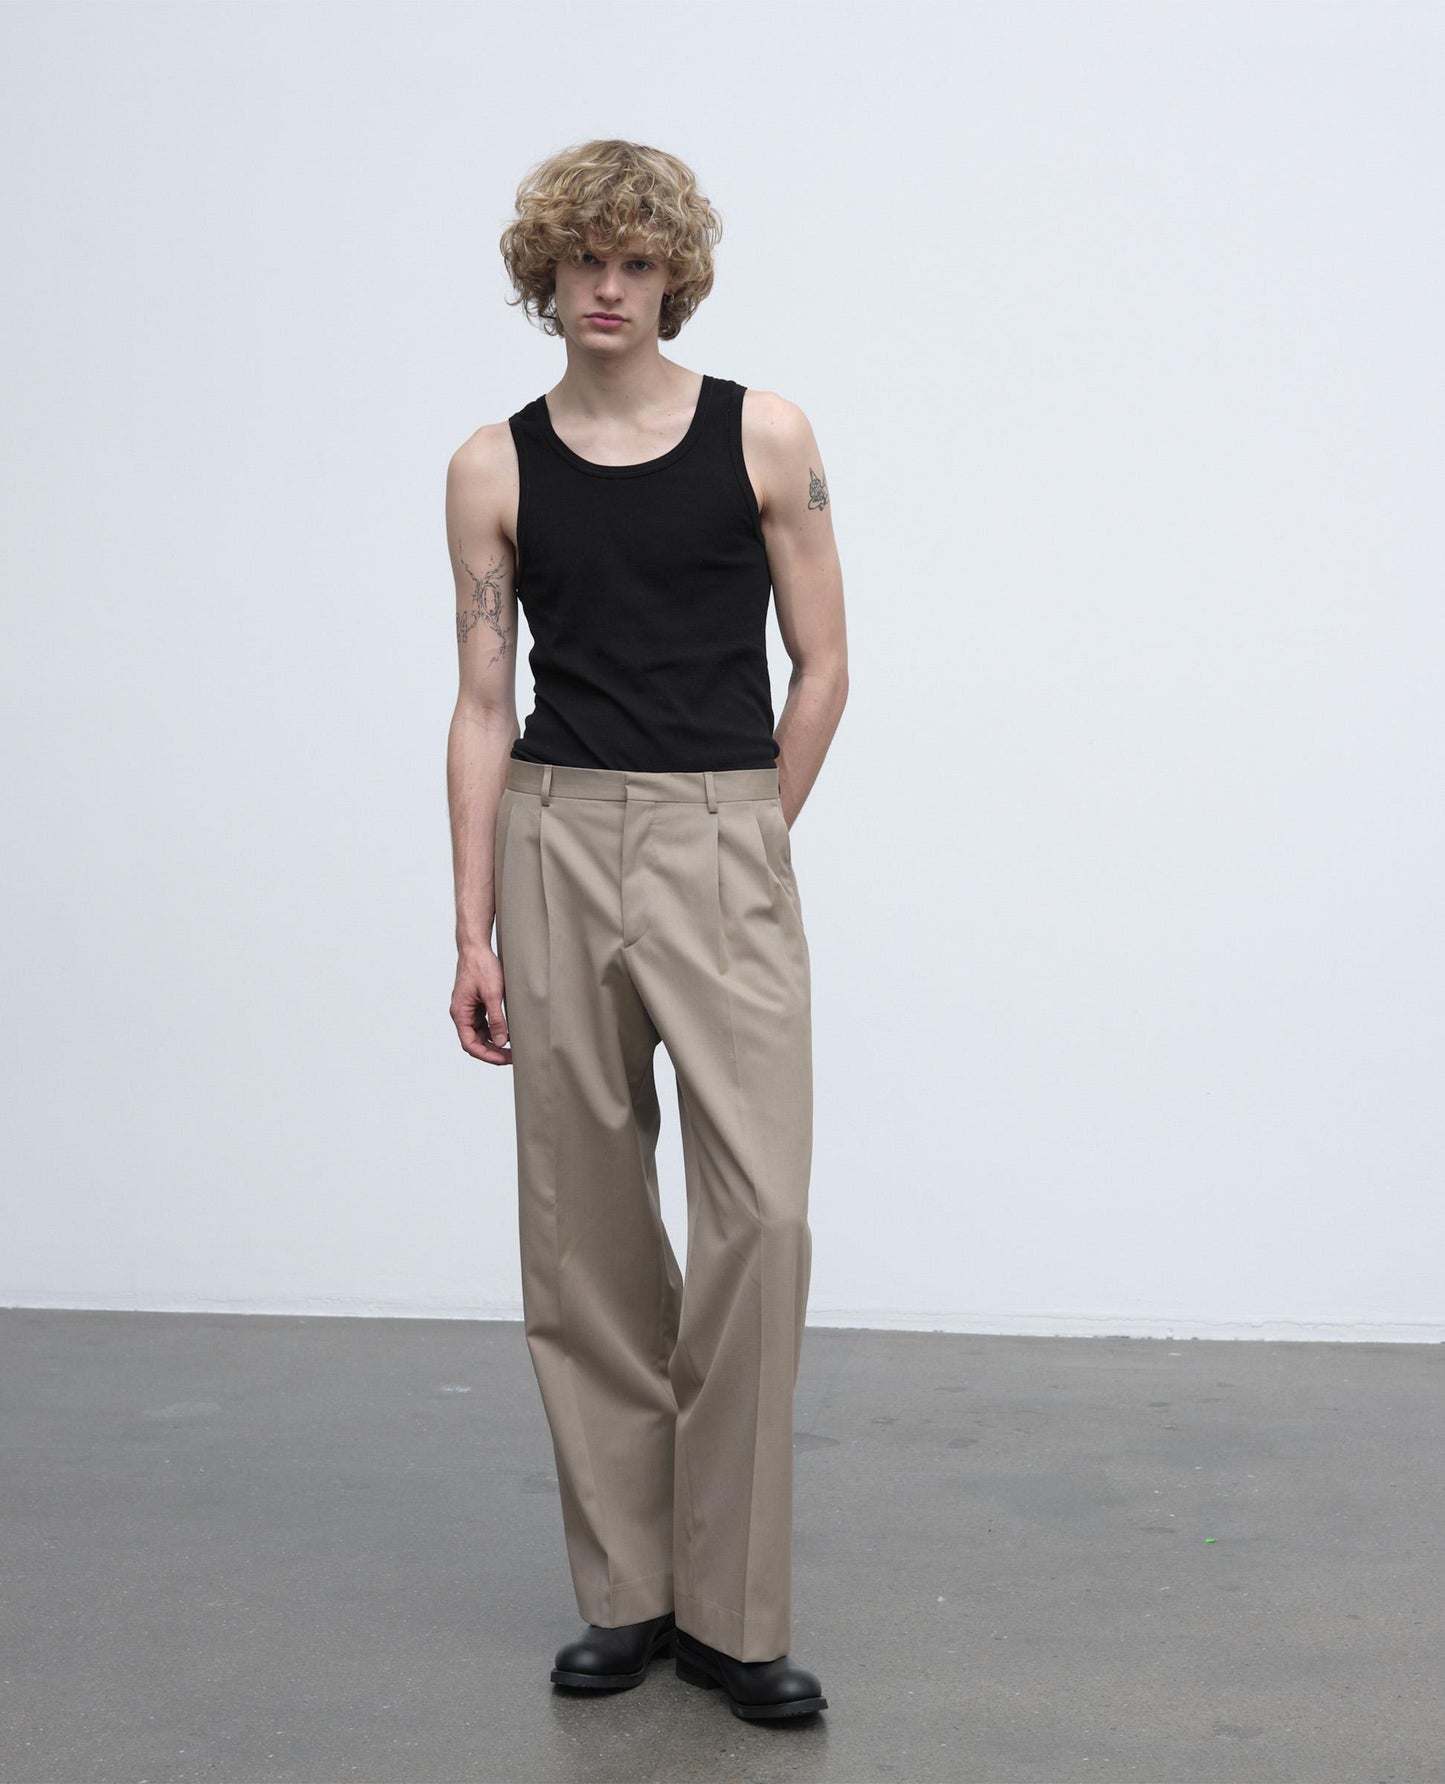 WIDE PLEATED TROUSER . SAND